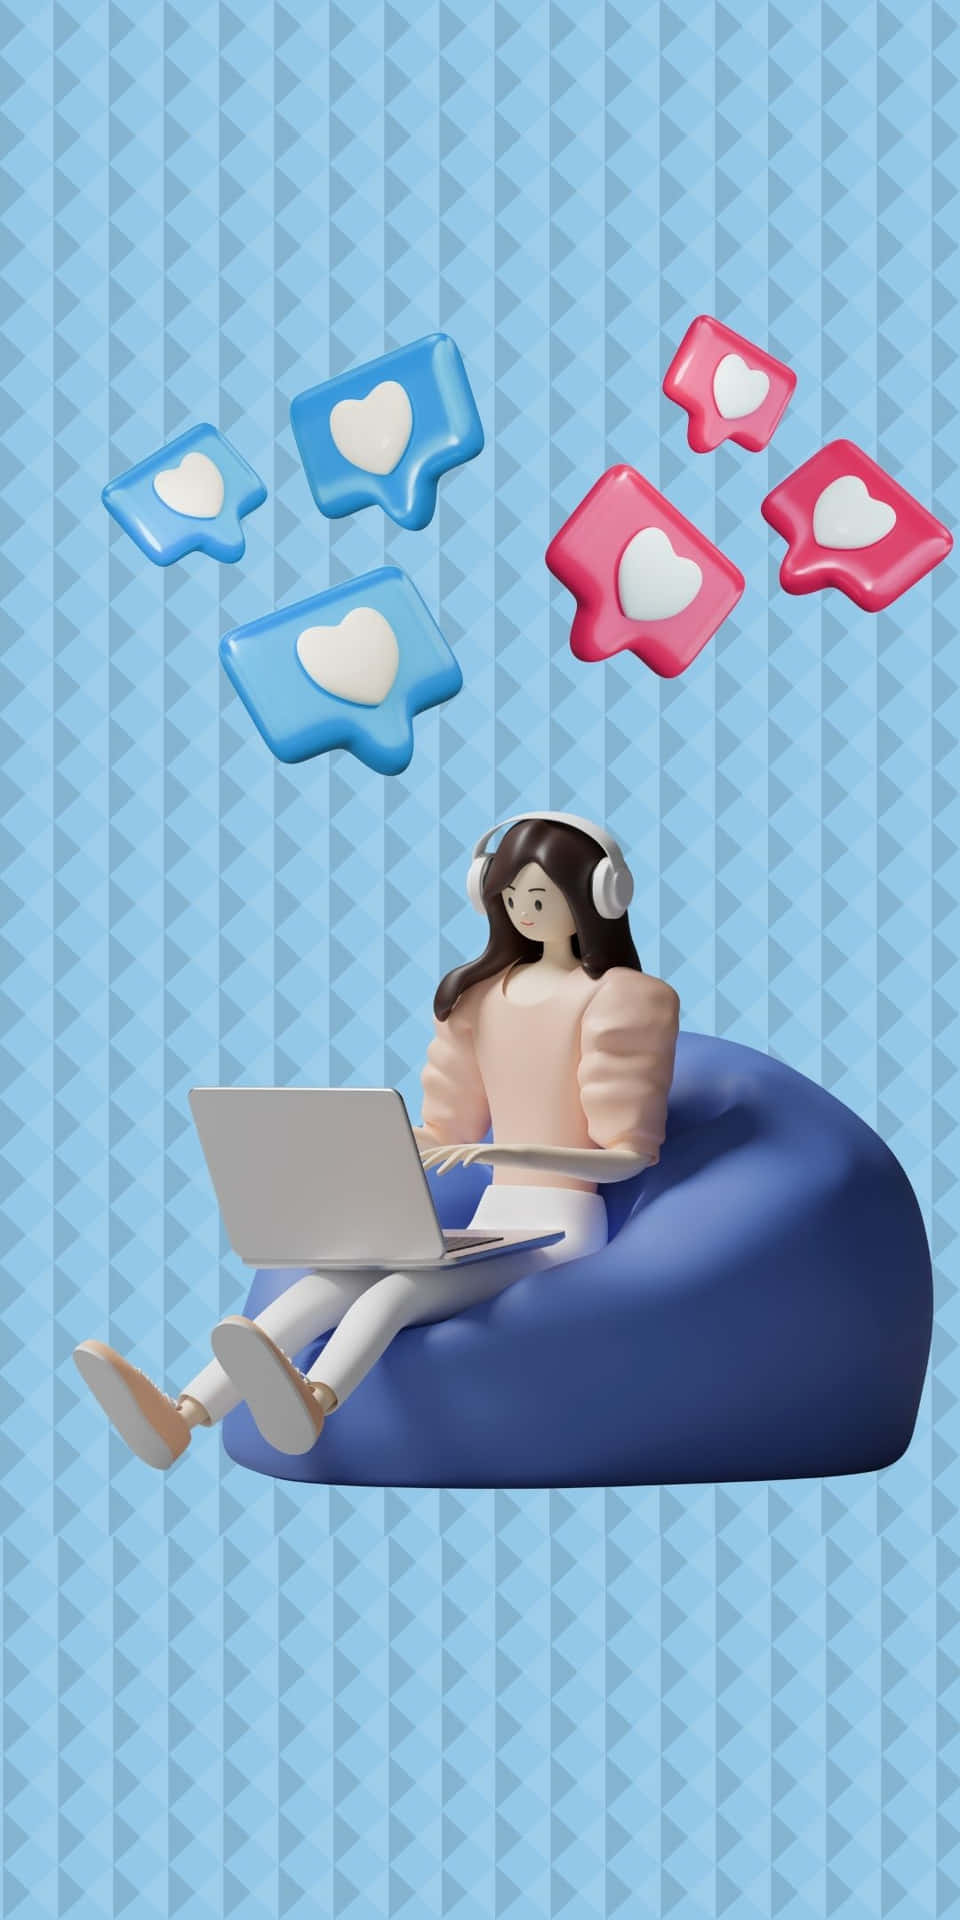 A Woman Sitting On A Bean Bag With A Laptop And Heart Icons Background